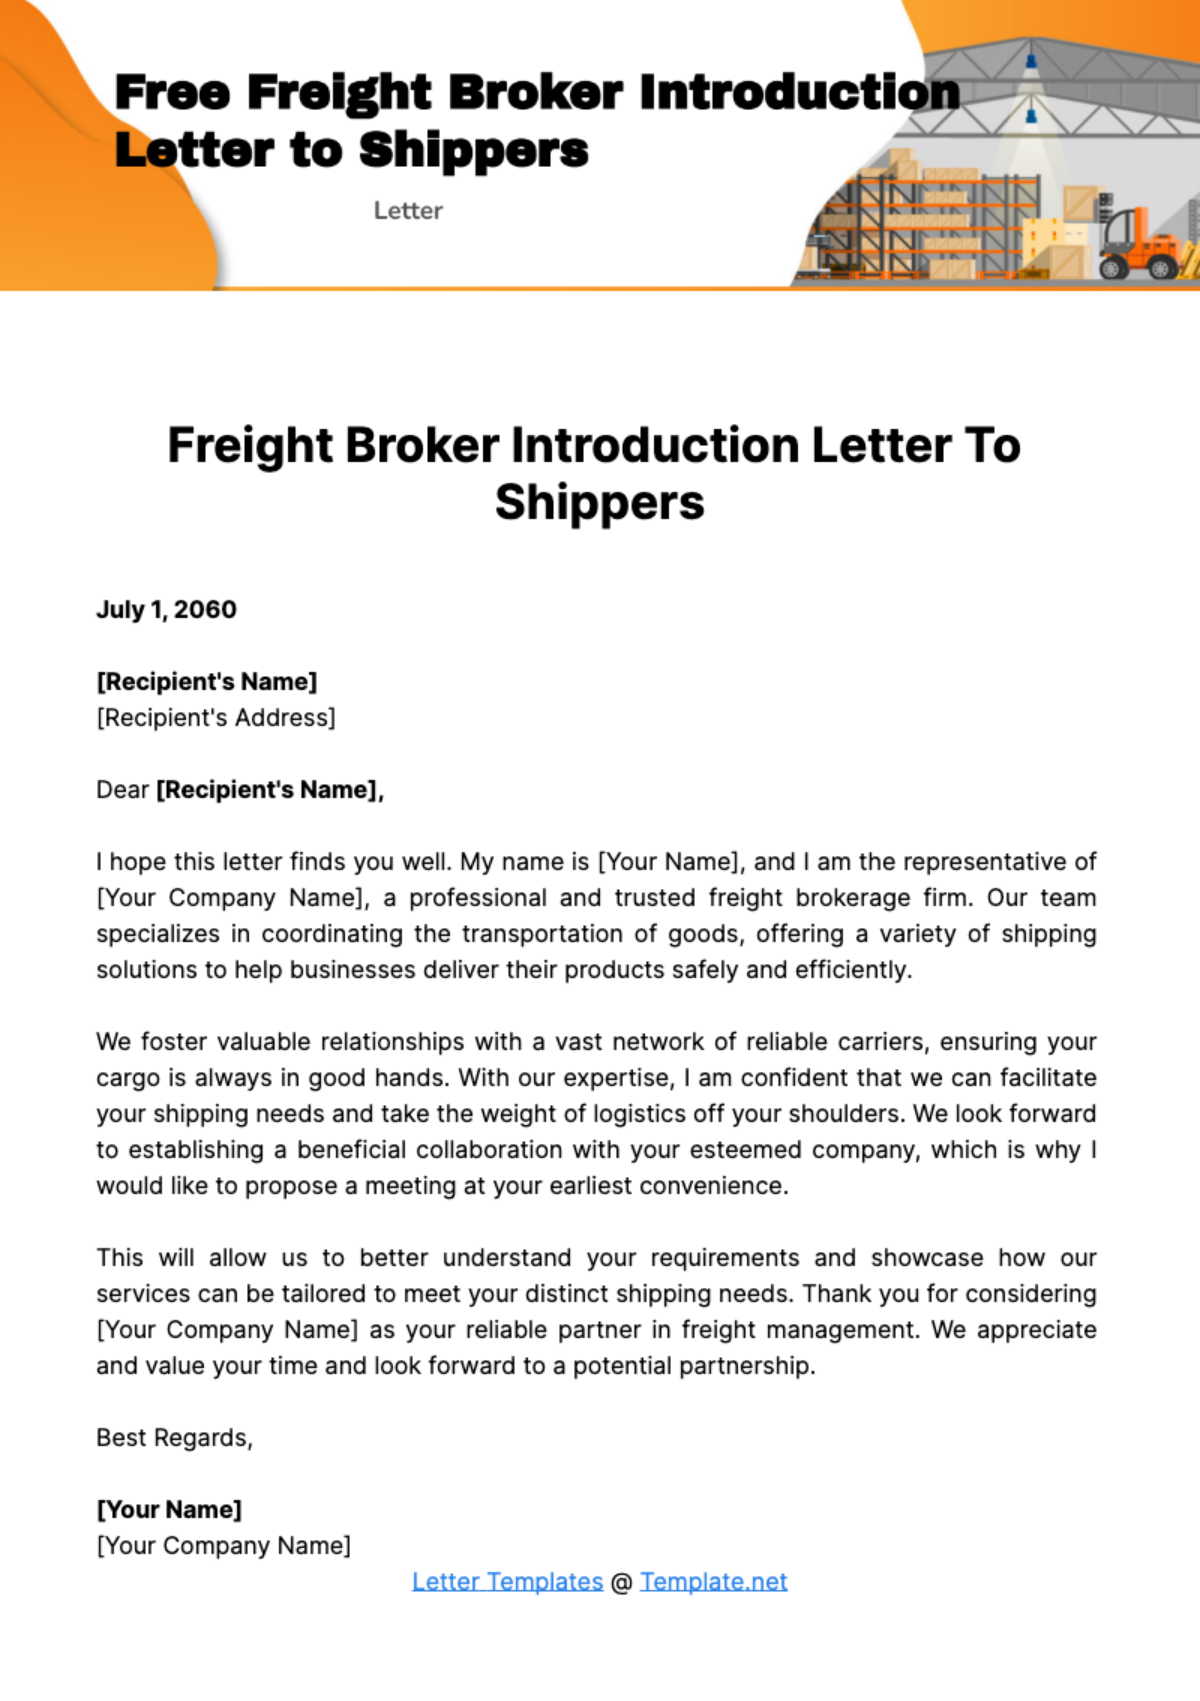 Free Freight Broker Introduction Letter to Shippers Template